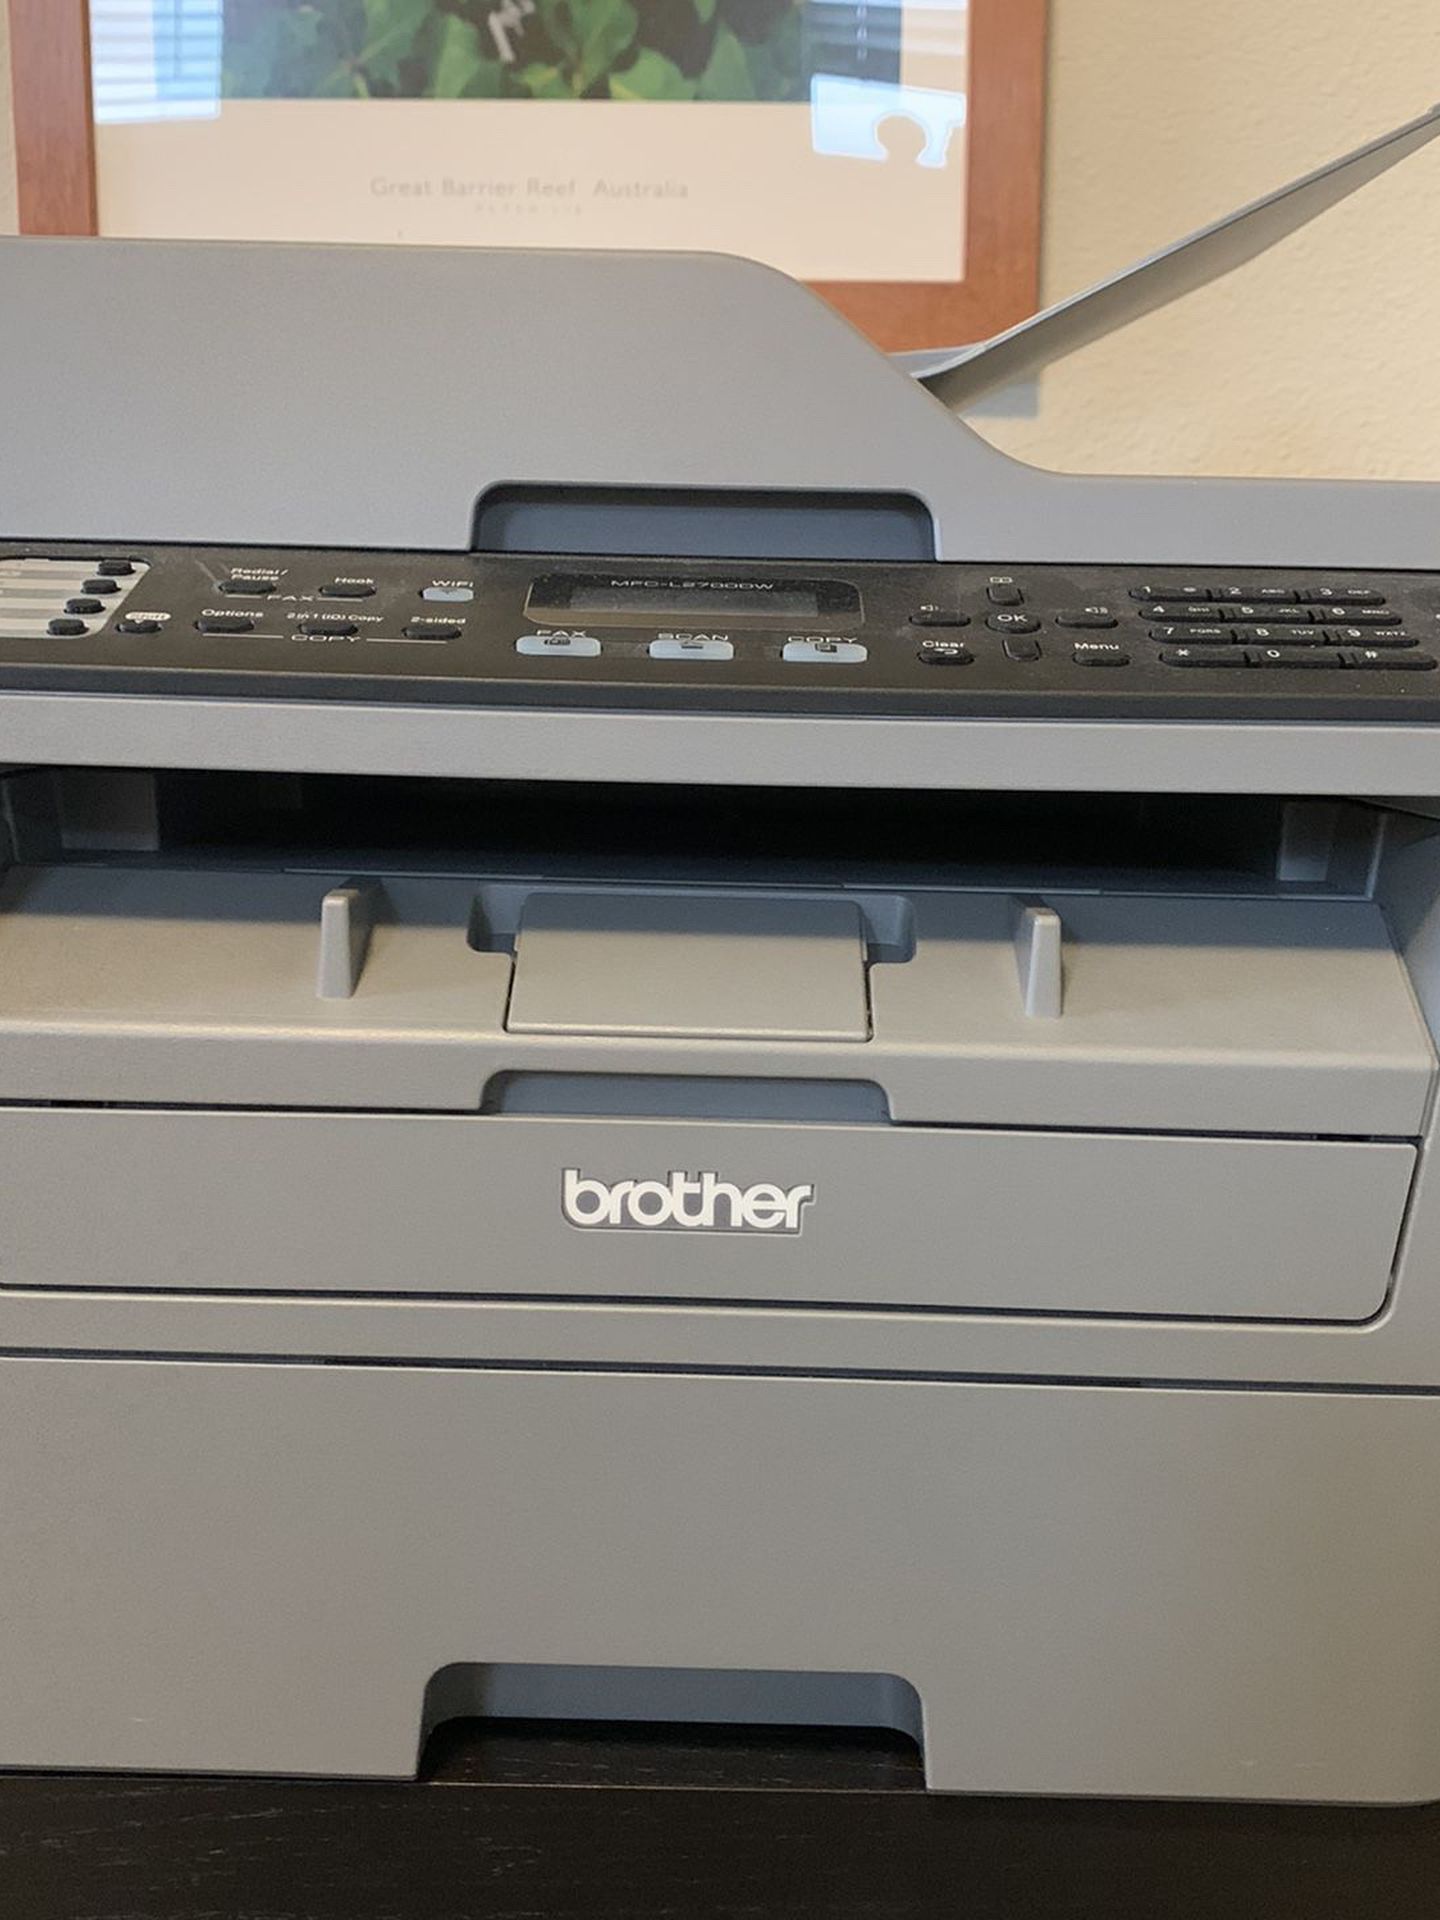 Used Wireless brother MFC-L2700W copier, fax , and printer